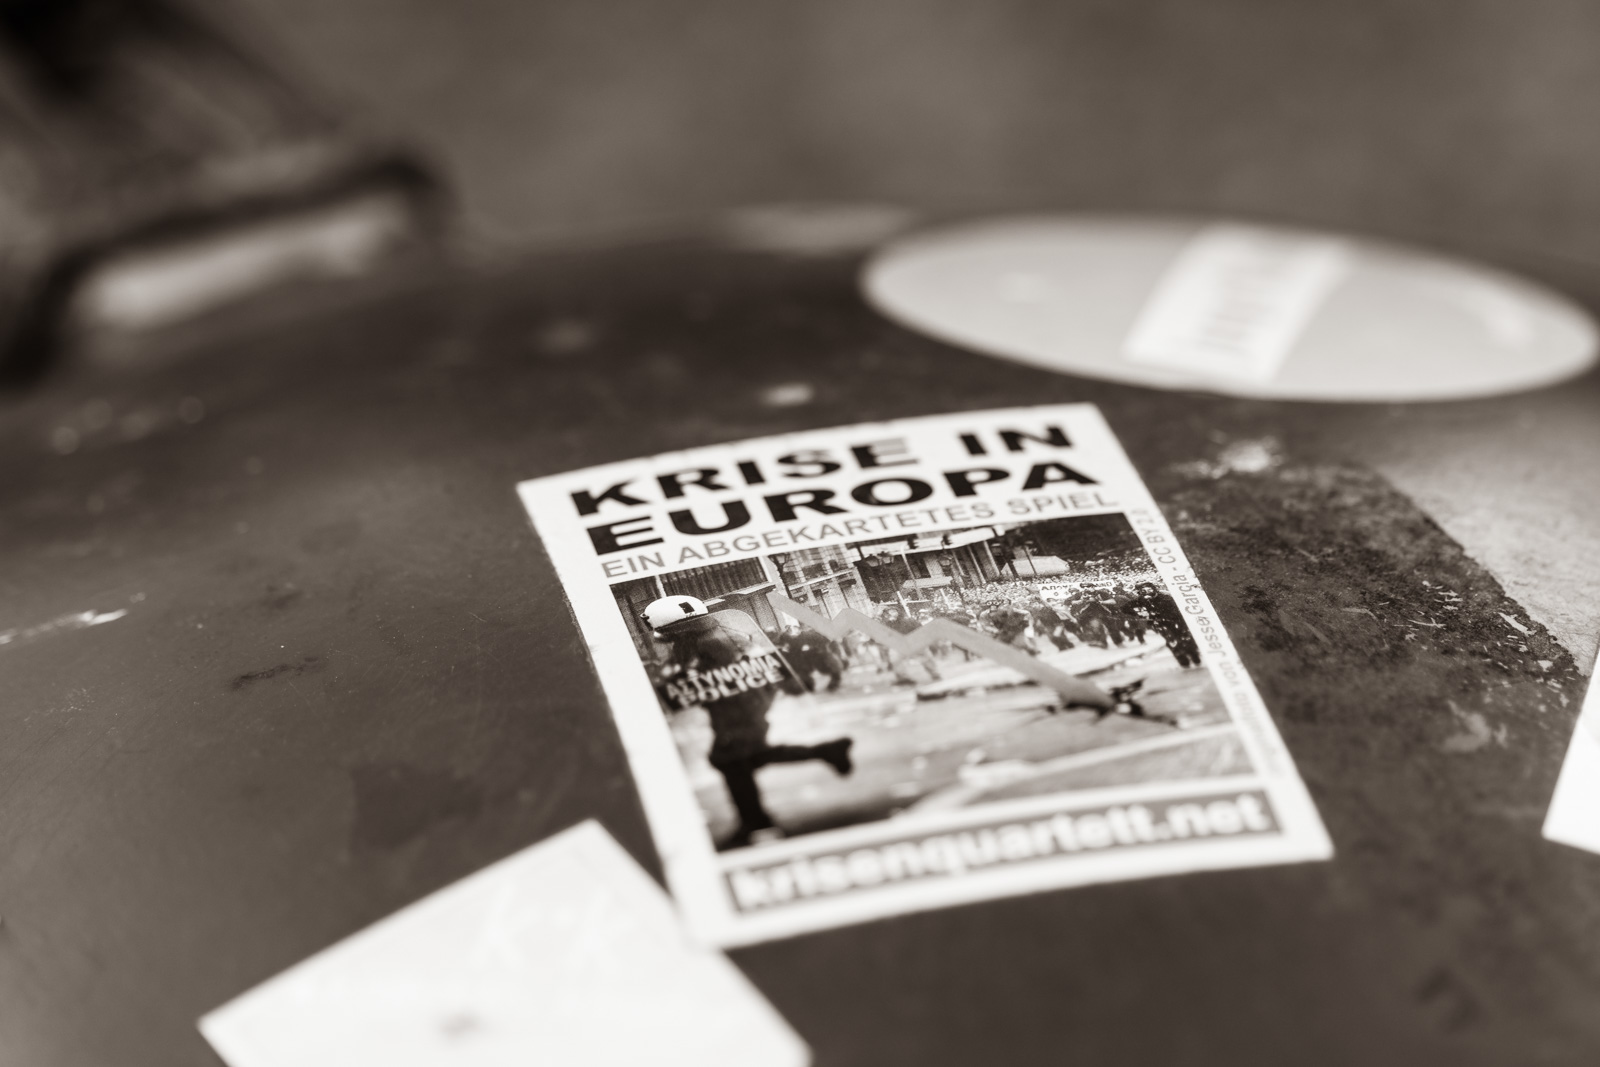 Disposable Messages - Sticker Crisis in Europe